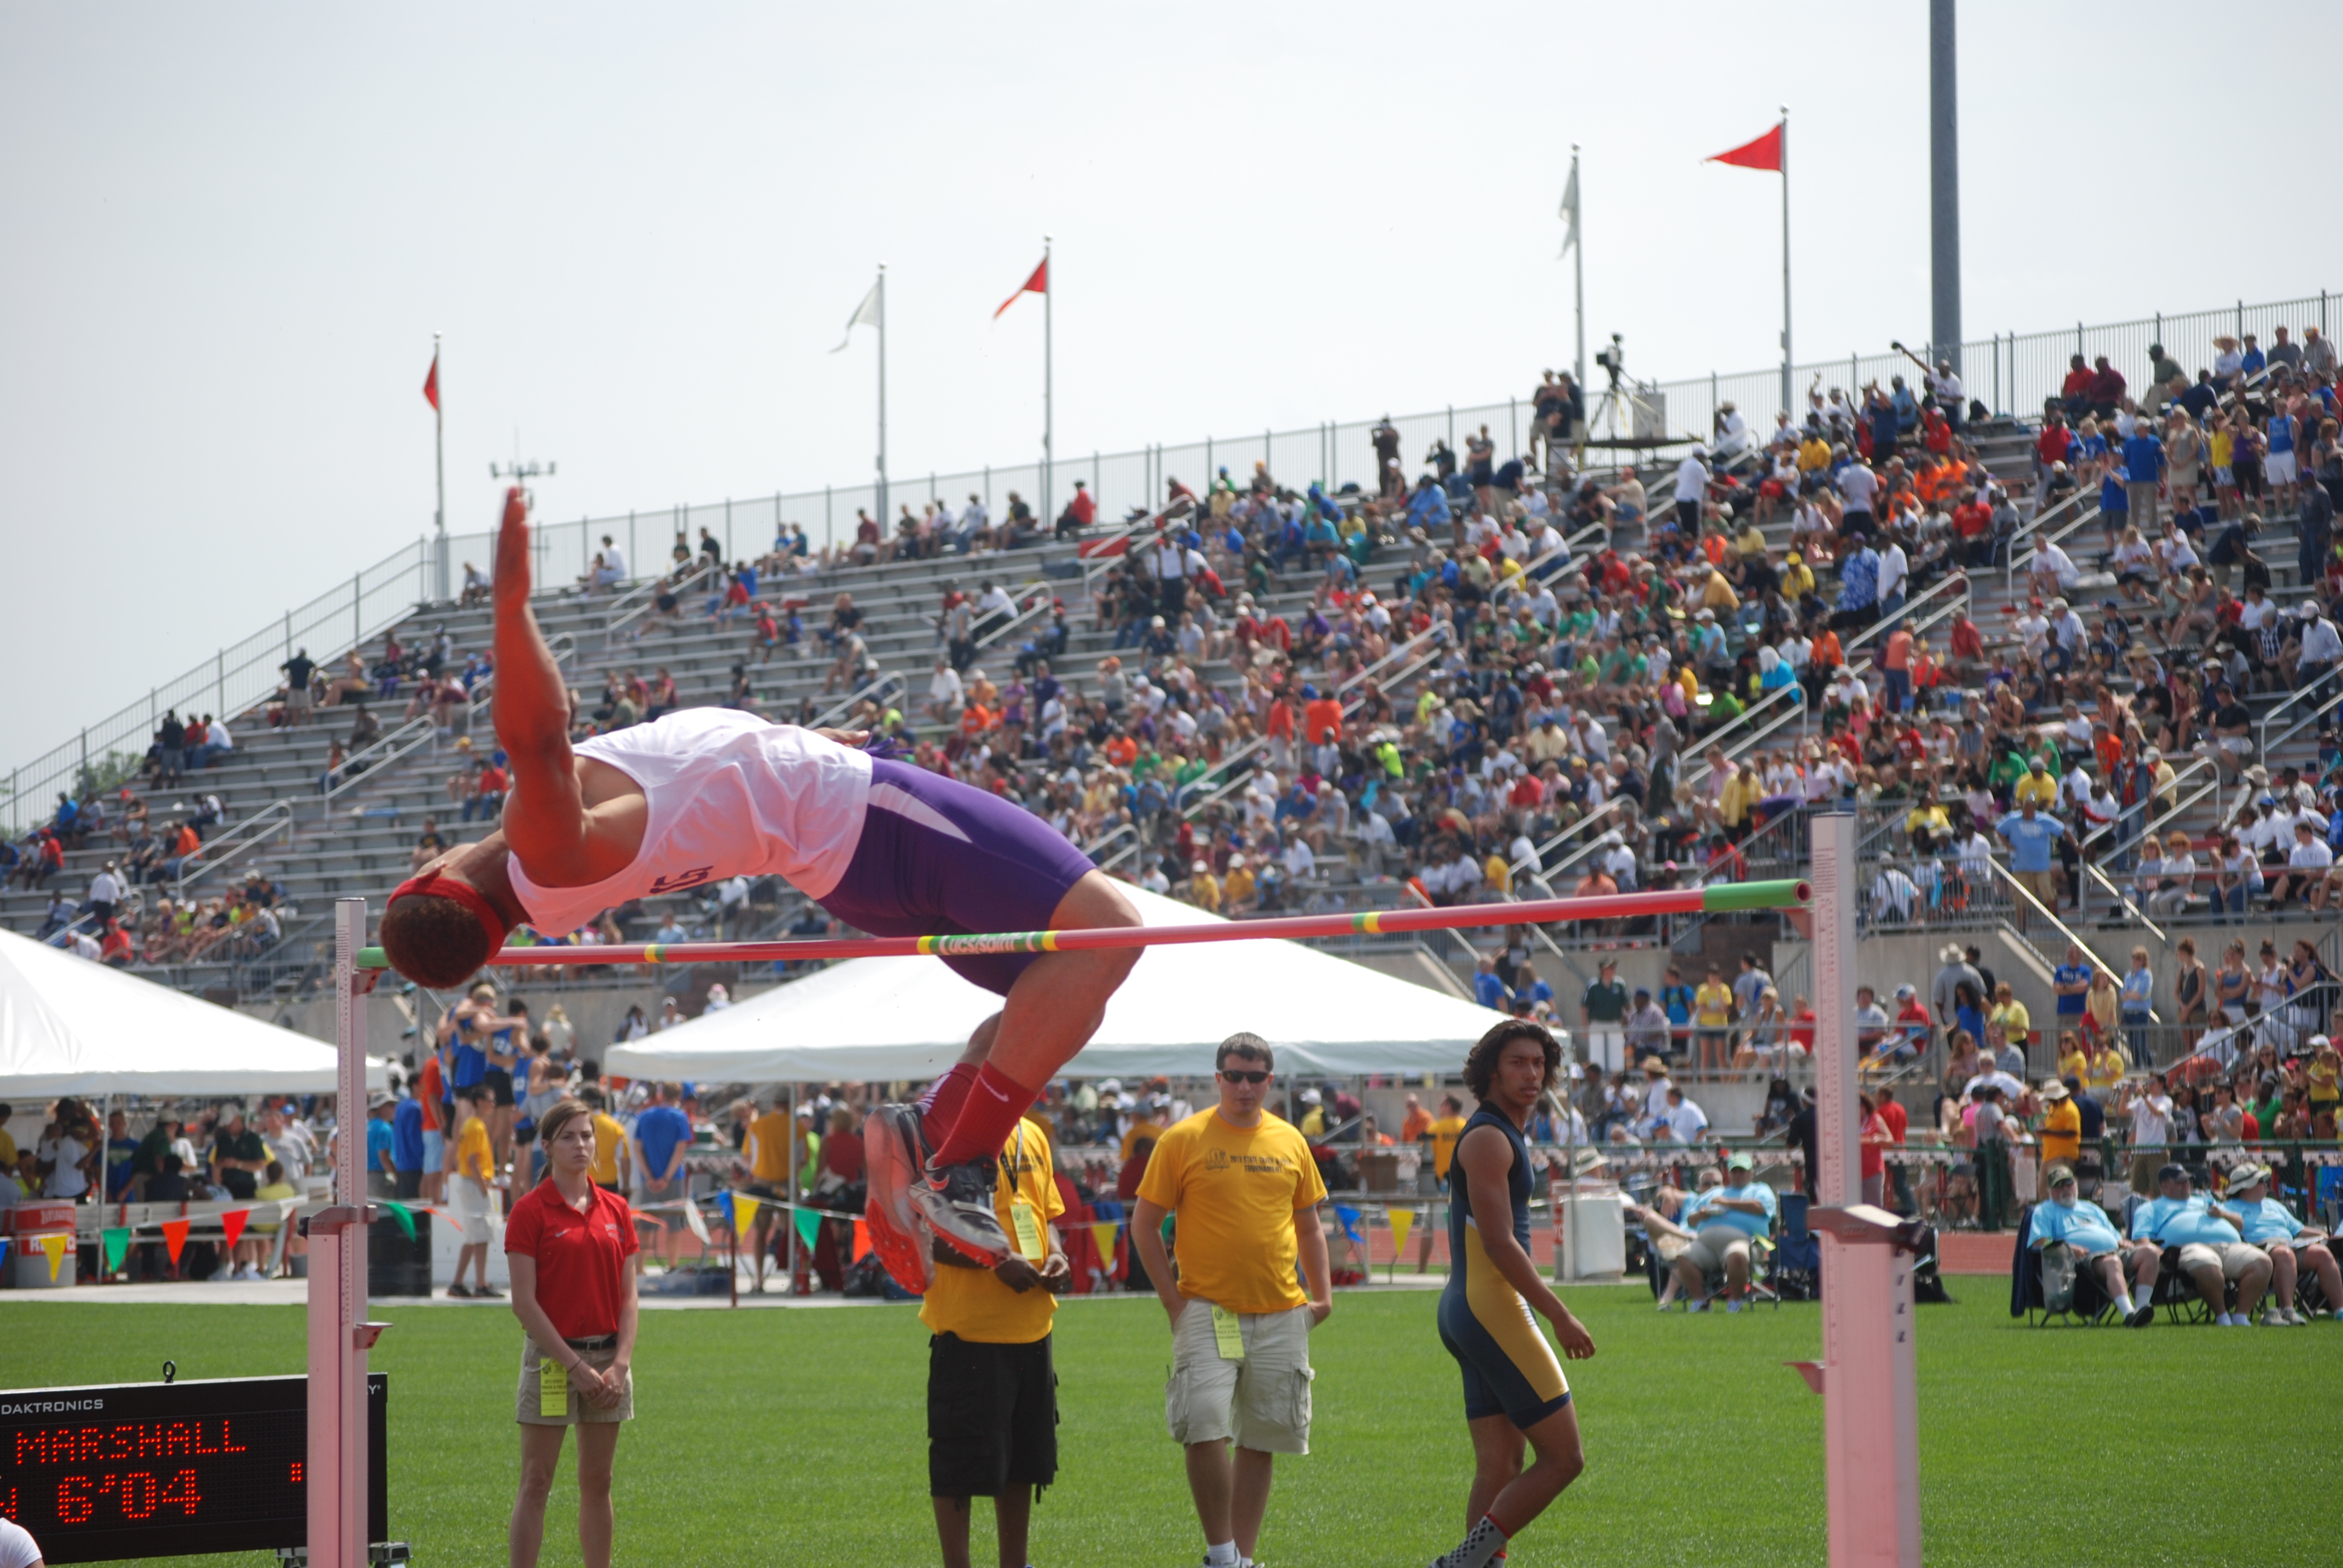 Jalin Marshall finished as the Division I runner-up in the high jump Saturday at Jesse Owens Memorial Stadium in Columbus. He jumped 6 feet, 8 inches to place second.